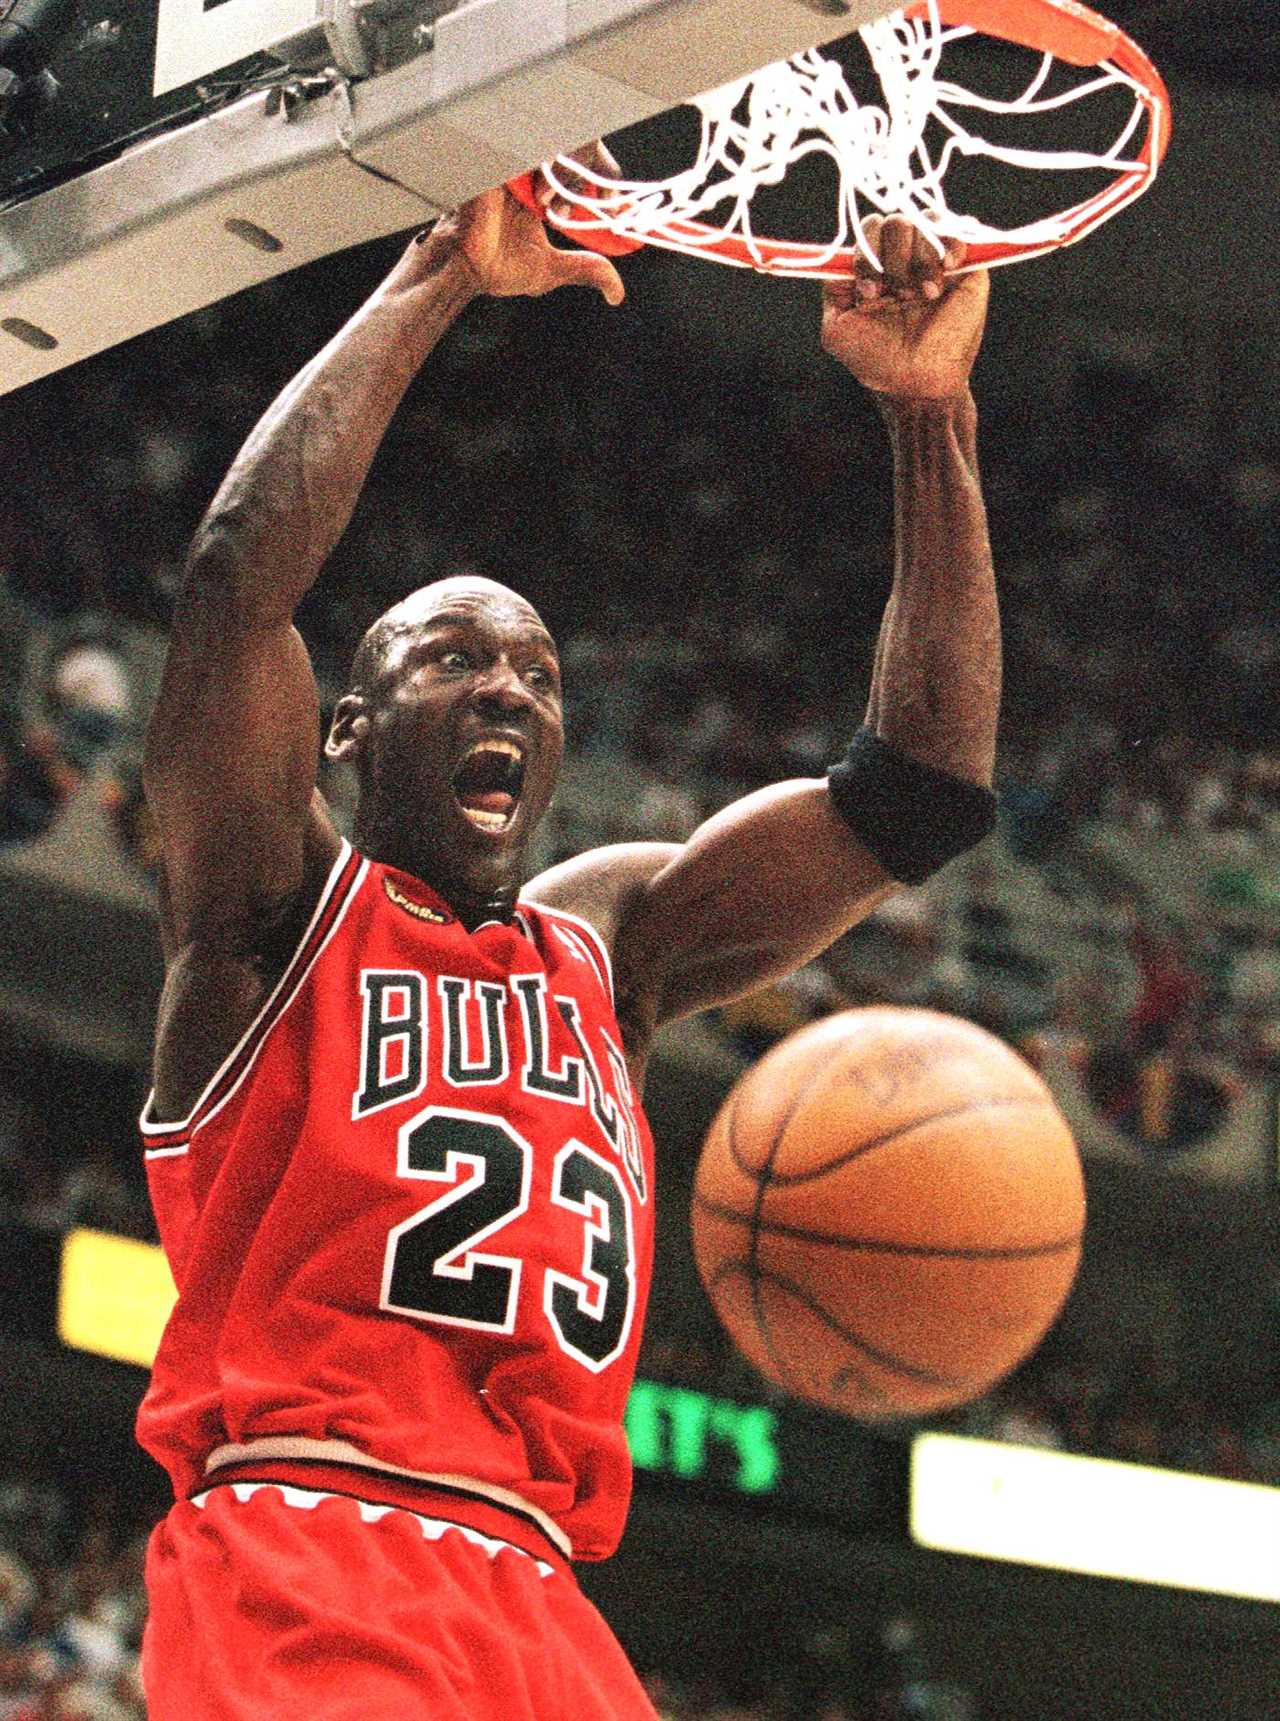 SALT LAKE CITY, UNITED STATES: Michael Jordan of the Chicago Bulls hang son the rim after a dunk 05 June against the Utah Jazz in game two of the NBA Finals at the Delta Center in Salt Lake City, UT. Jordan had a game high 37 points leading the Bulls to a victory 93-88 to tie the series at 1-1. AFP PHOTO/Jeff HAYNES (Photo credit should read JEFF HAYNES/AFP via Getty Images)